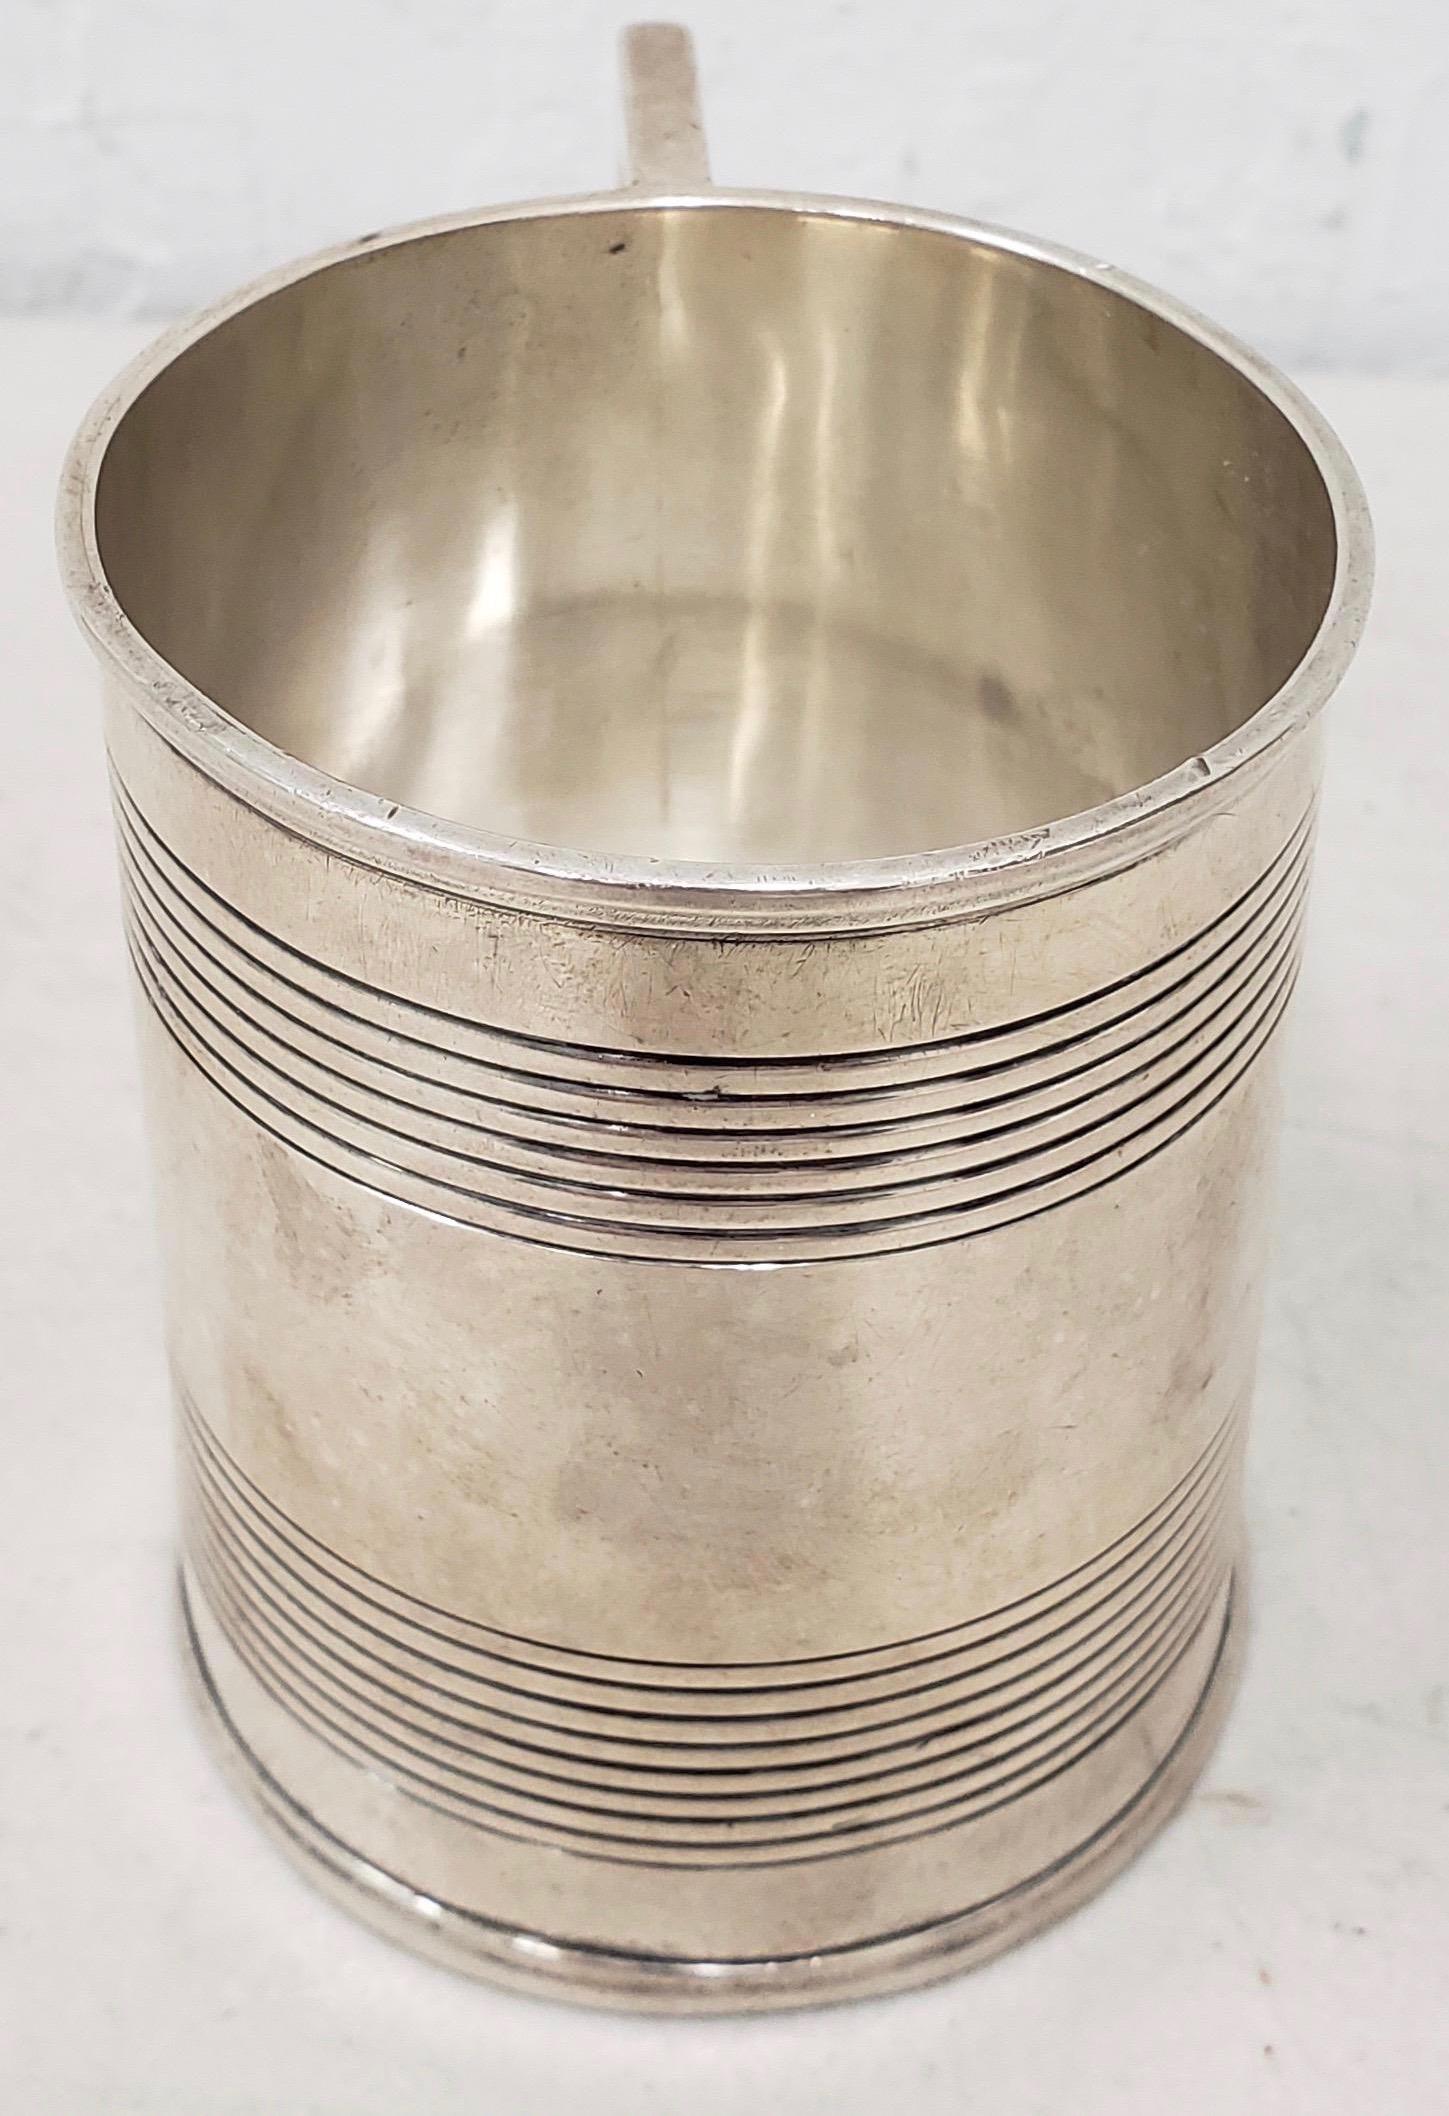 Hand-Crafted 19th Century Sterling Silver Christening Cup with Hallmarks